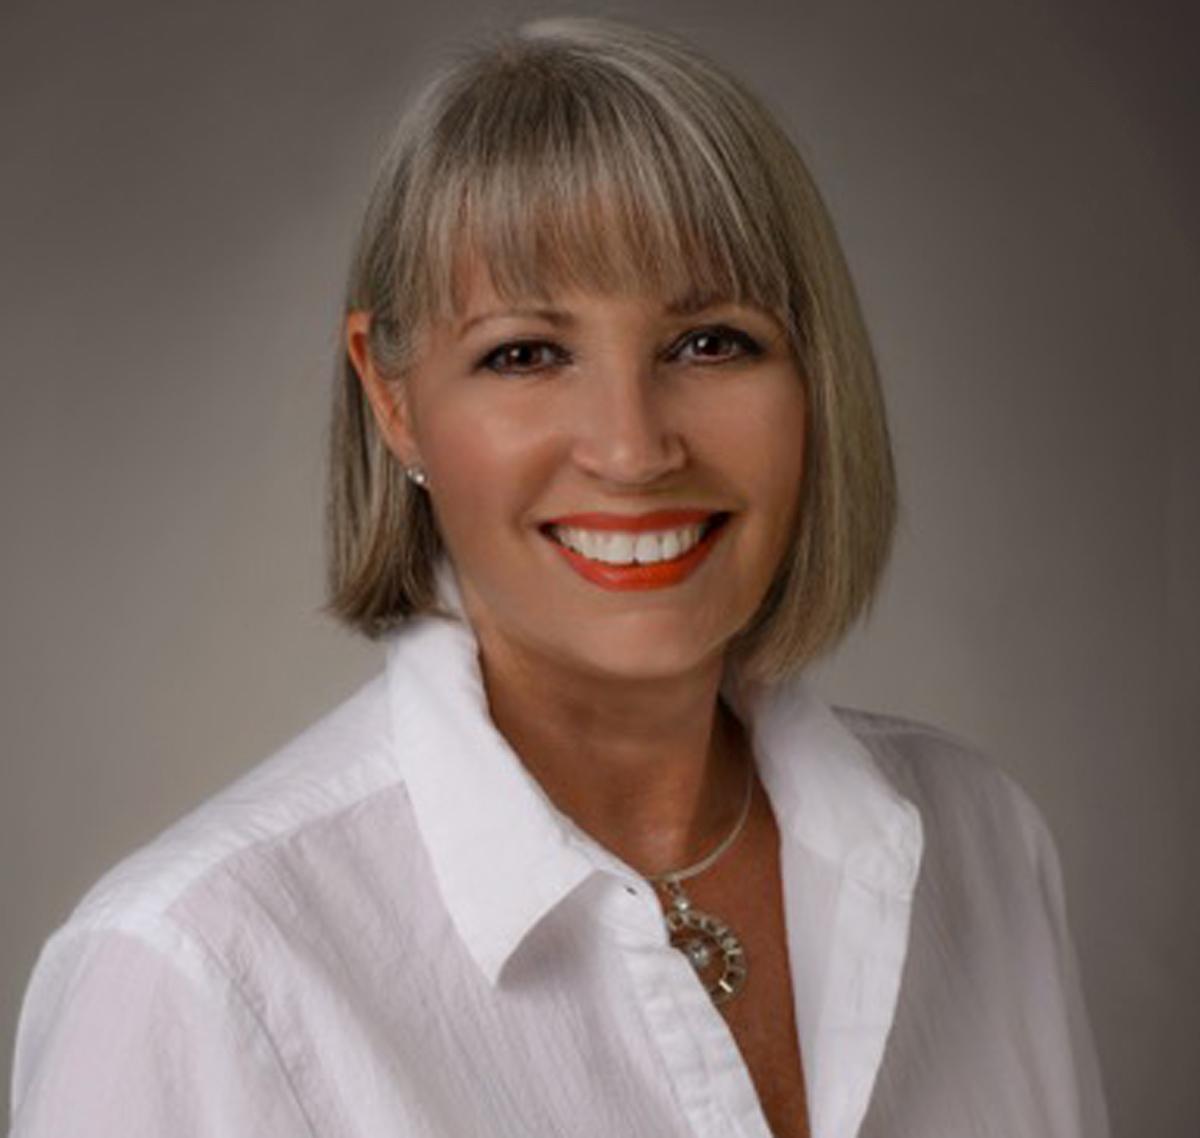 Alison Howland of Spa Success Consultants worked on the Vanderbilt Spa / Spa Success Consultants